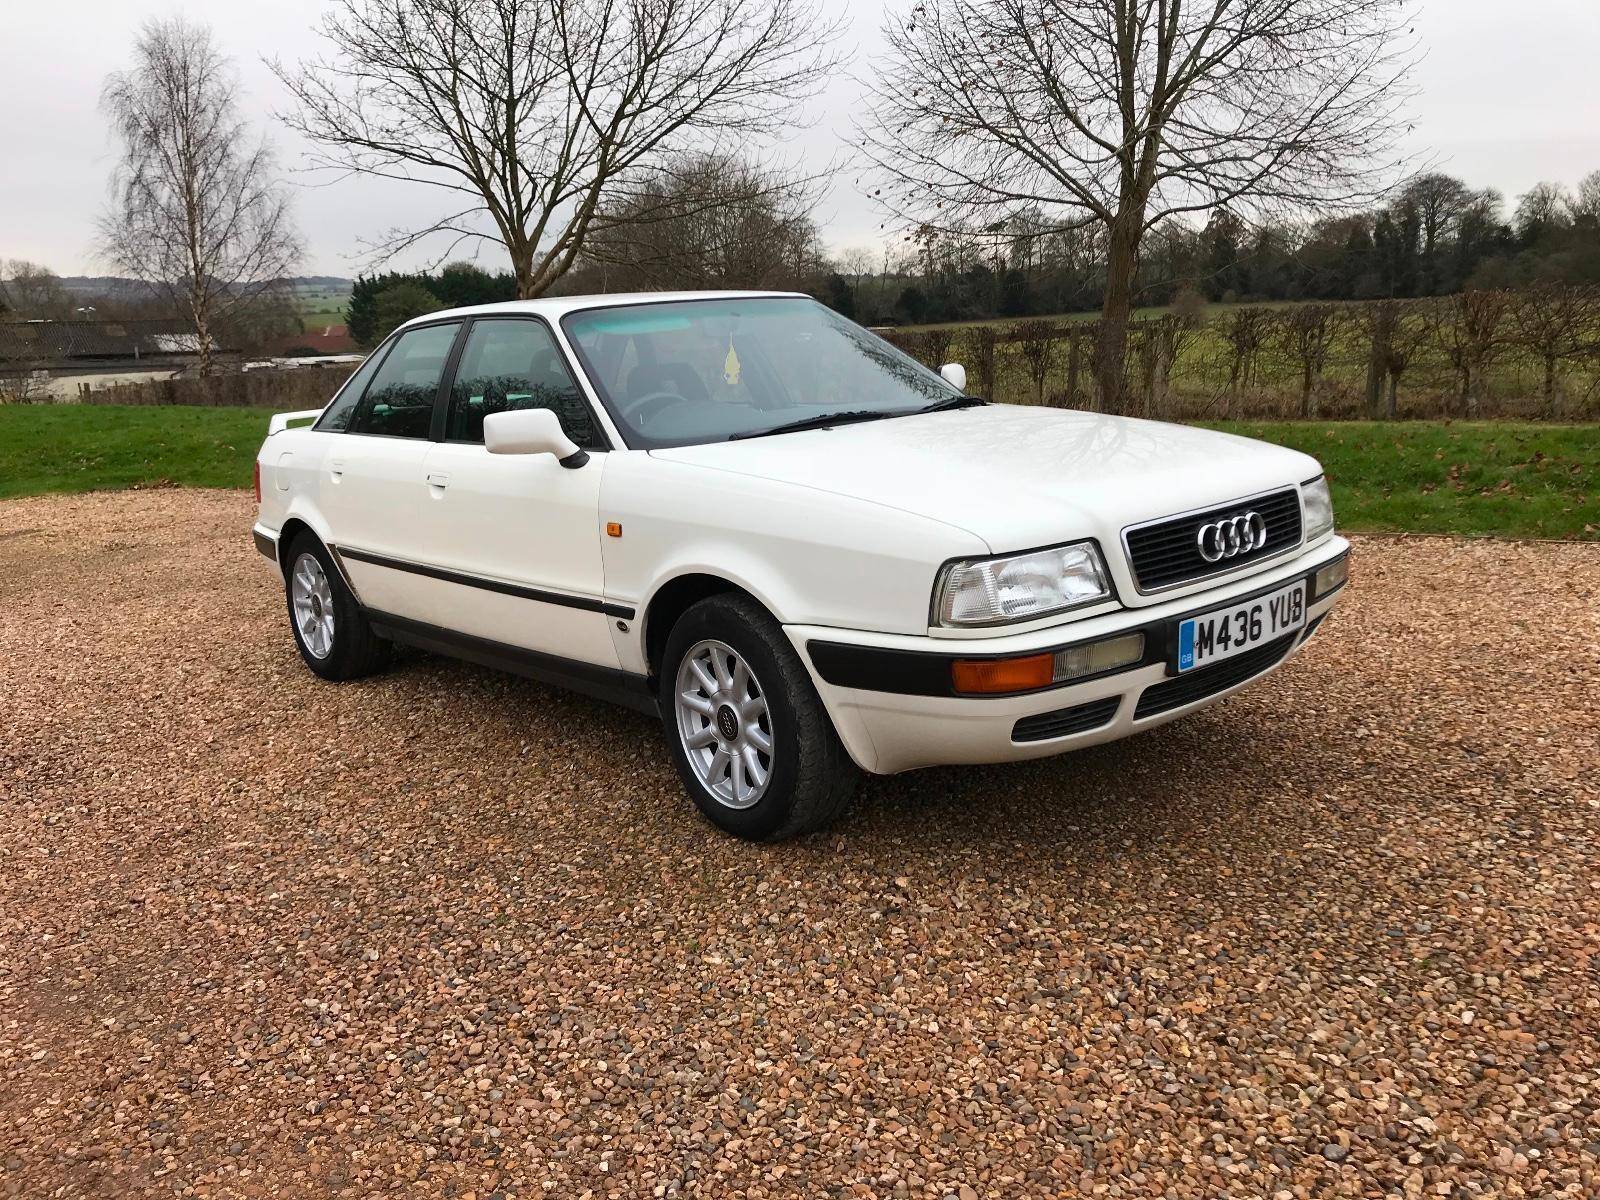 For Sale: Audi 80 - 2.6E (1995) offered for GBP 1,995